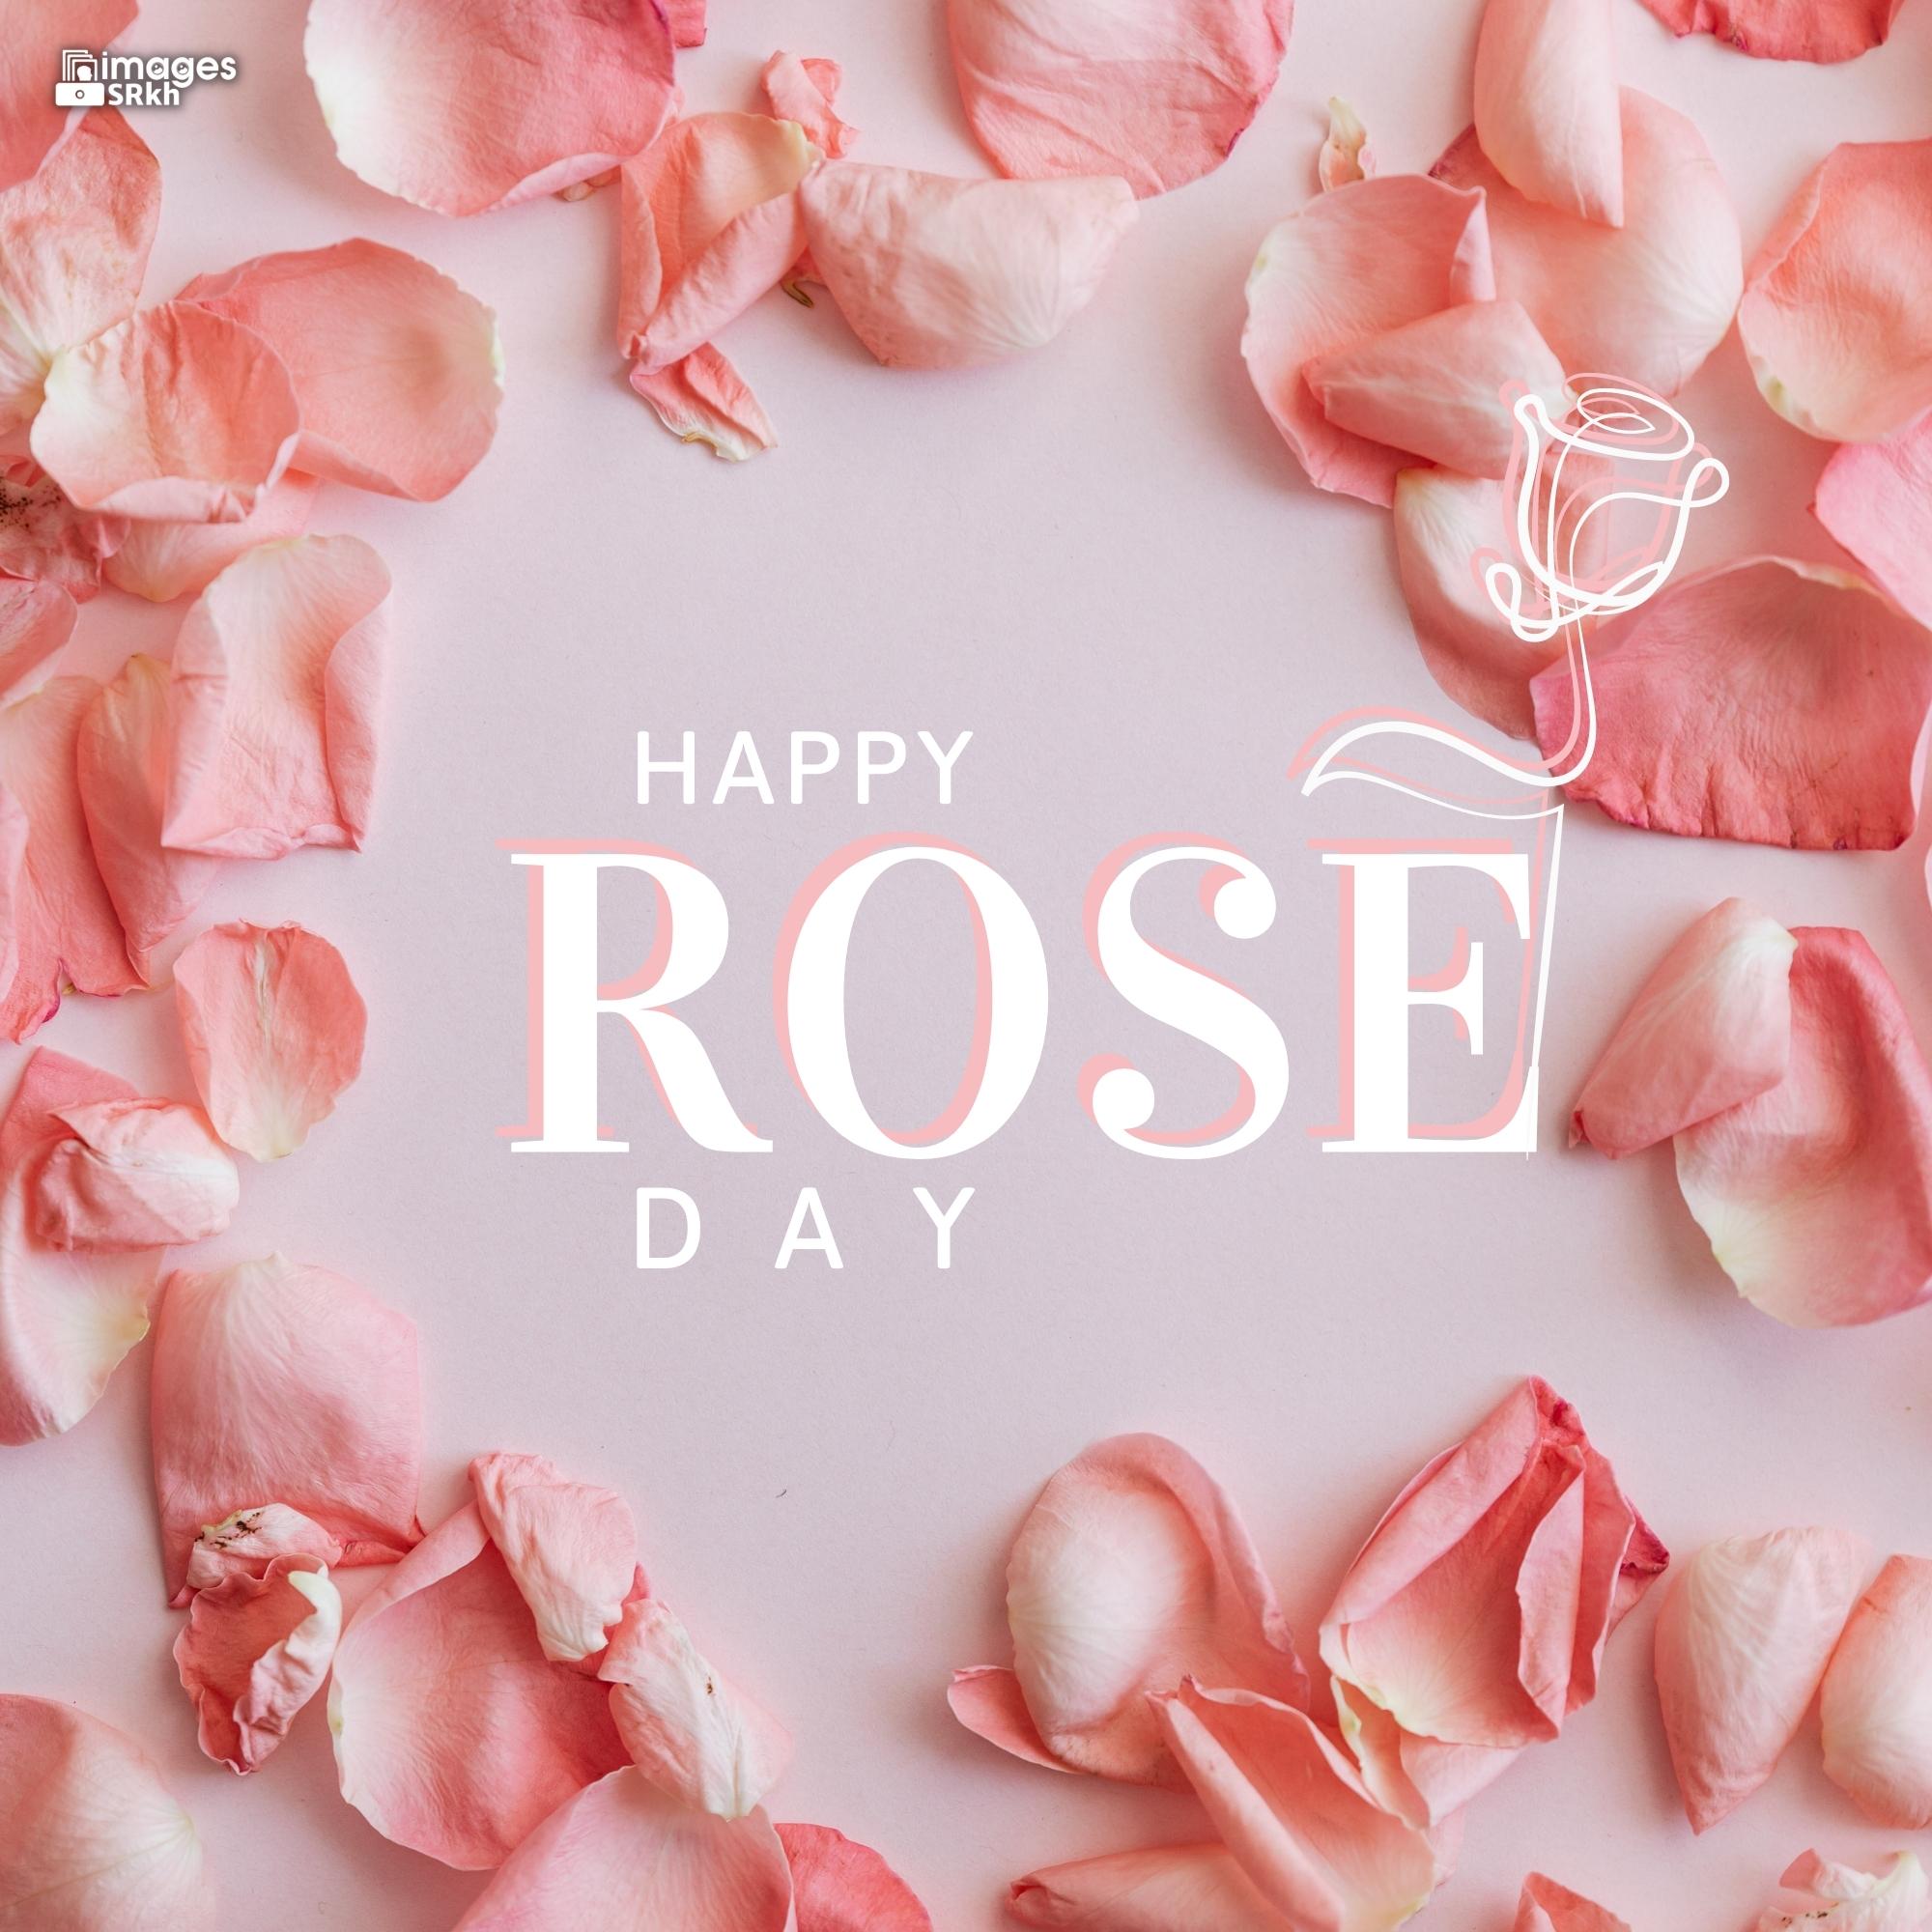 Happy Rose Day Image Hd Download (104)